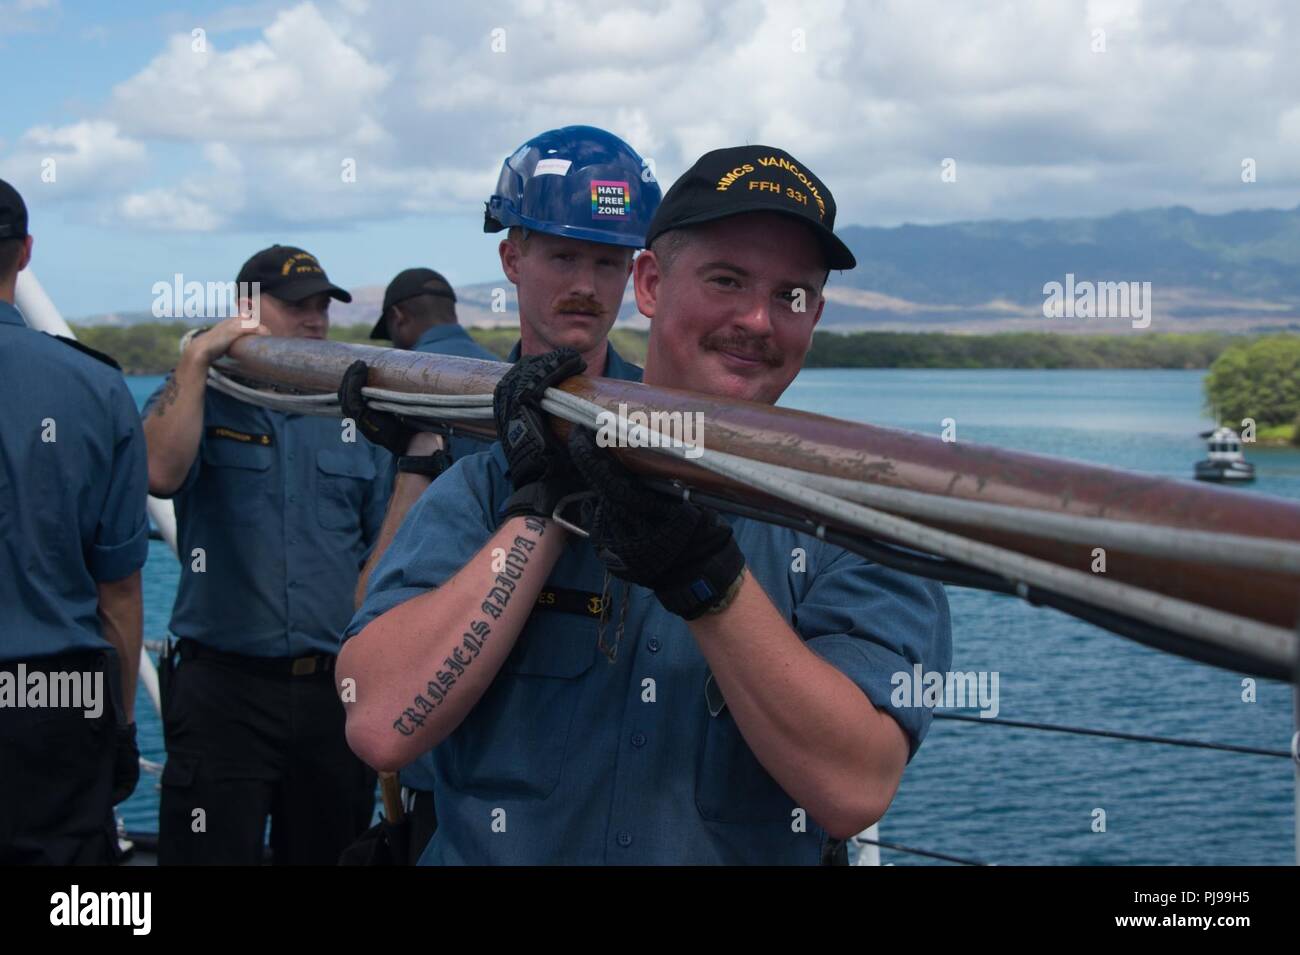 PEARL HARBOR (July 9, 2018) Ordinary Seaman (OS)  Andrew Henderson (rear) and Leading Seaman (LS) Josh Reves (front) stow the “jack staff” as the Royal Canadian Navy frigate HMCS Vancouver (FFH 331) departs Pearl Harbor for the at sea phase of the Rim of the Pacific exercise (RIMPAC), July 9. Twenty-five nations, 46 ships, five submarines, about 200 aircraft and 25,000 personnel are participating in RIMPAC from June 27 to Aug. 2 in and around the Hawaiian Islands and Southern California. The world’s largest international maritime exercise, RIMPAC provides a unique training opportunity while fo Stock Photo